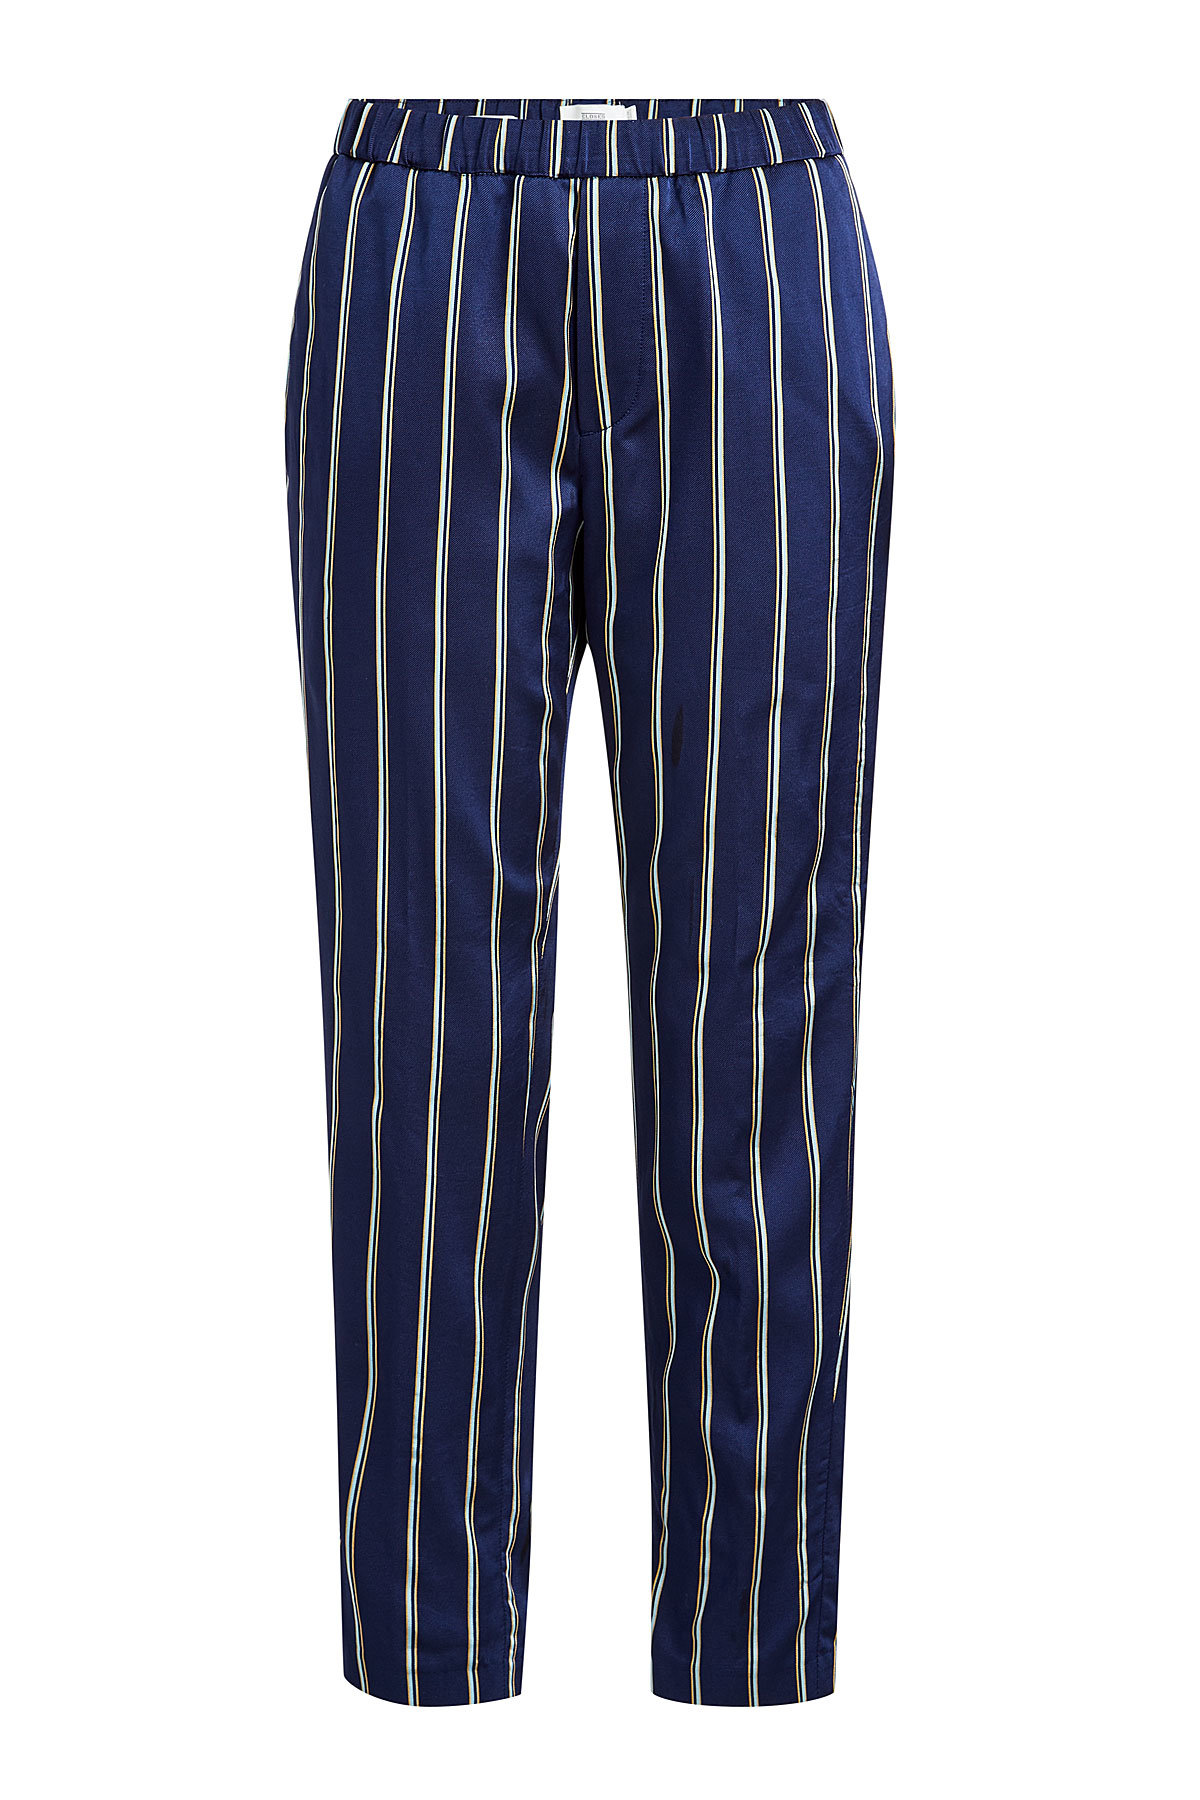 Closed - Striped Pants with Cotton